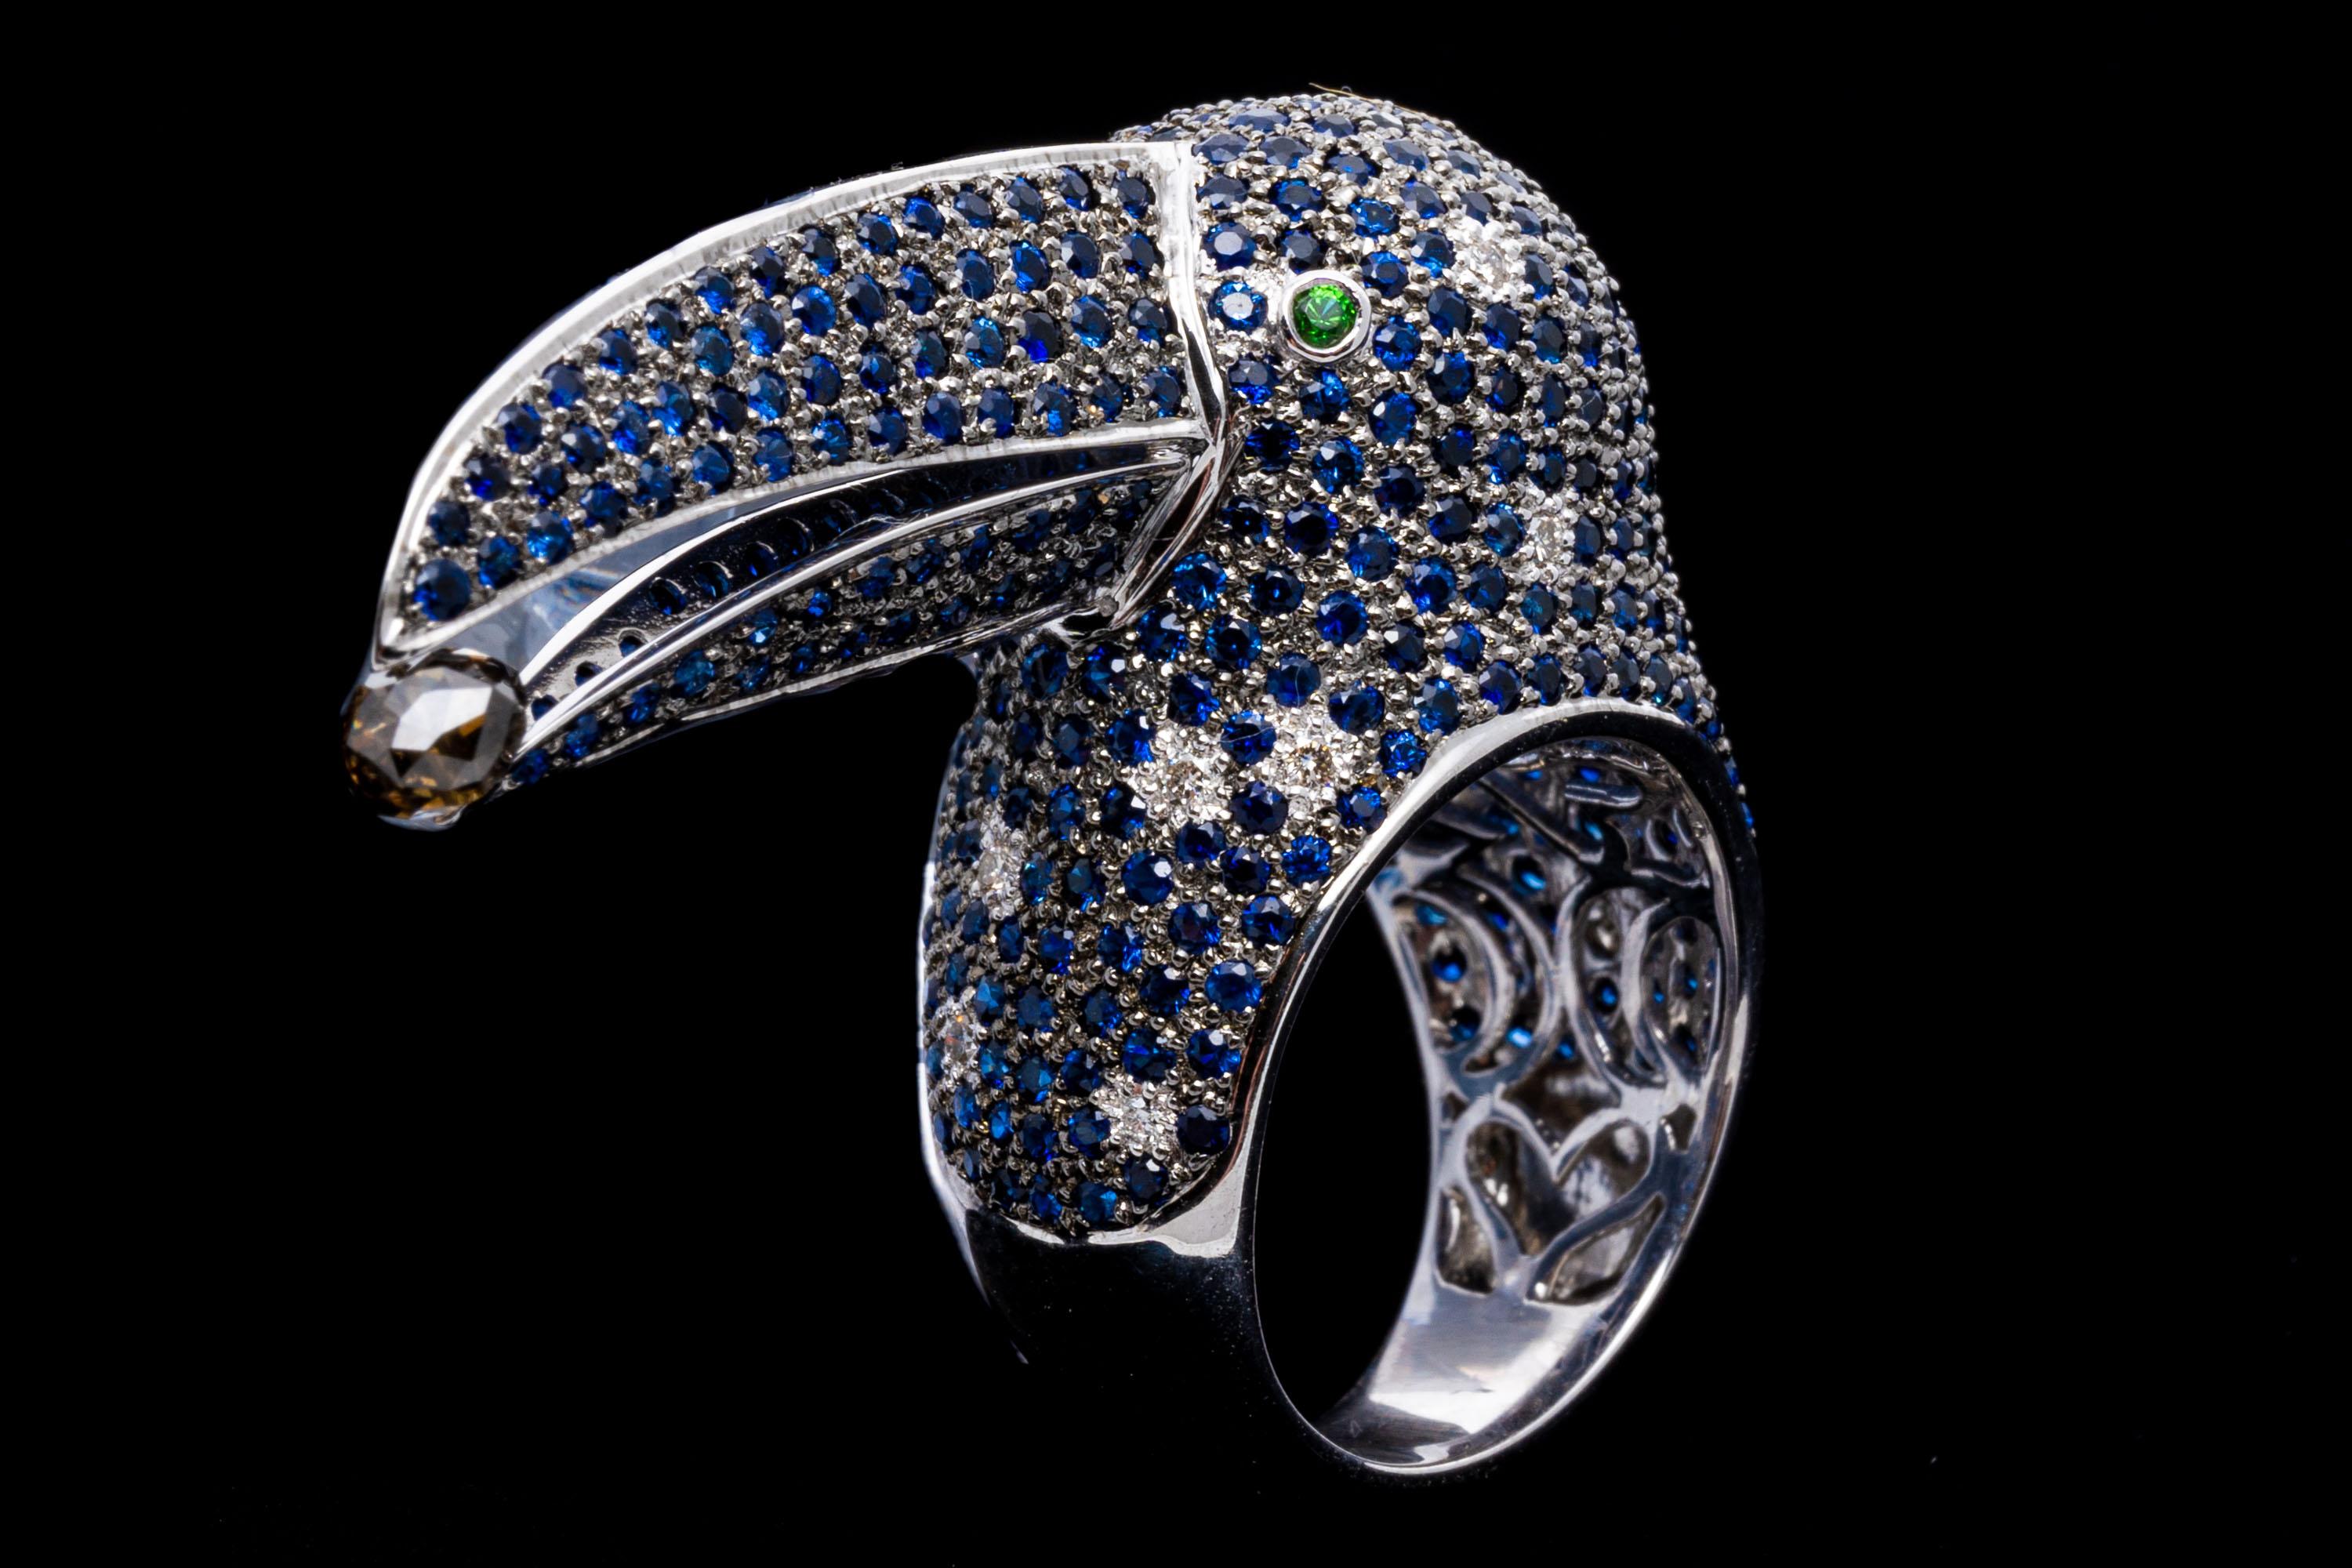 18k white gold ring. This phenomenal ring is a toucan motif, pave set with a field of round faceted, medium blue color sapphires, approximately 4.38 TCW and adorned with scattered round faceted diamonds, approximately 0.15 TCW. The face of the